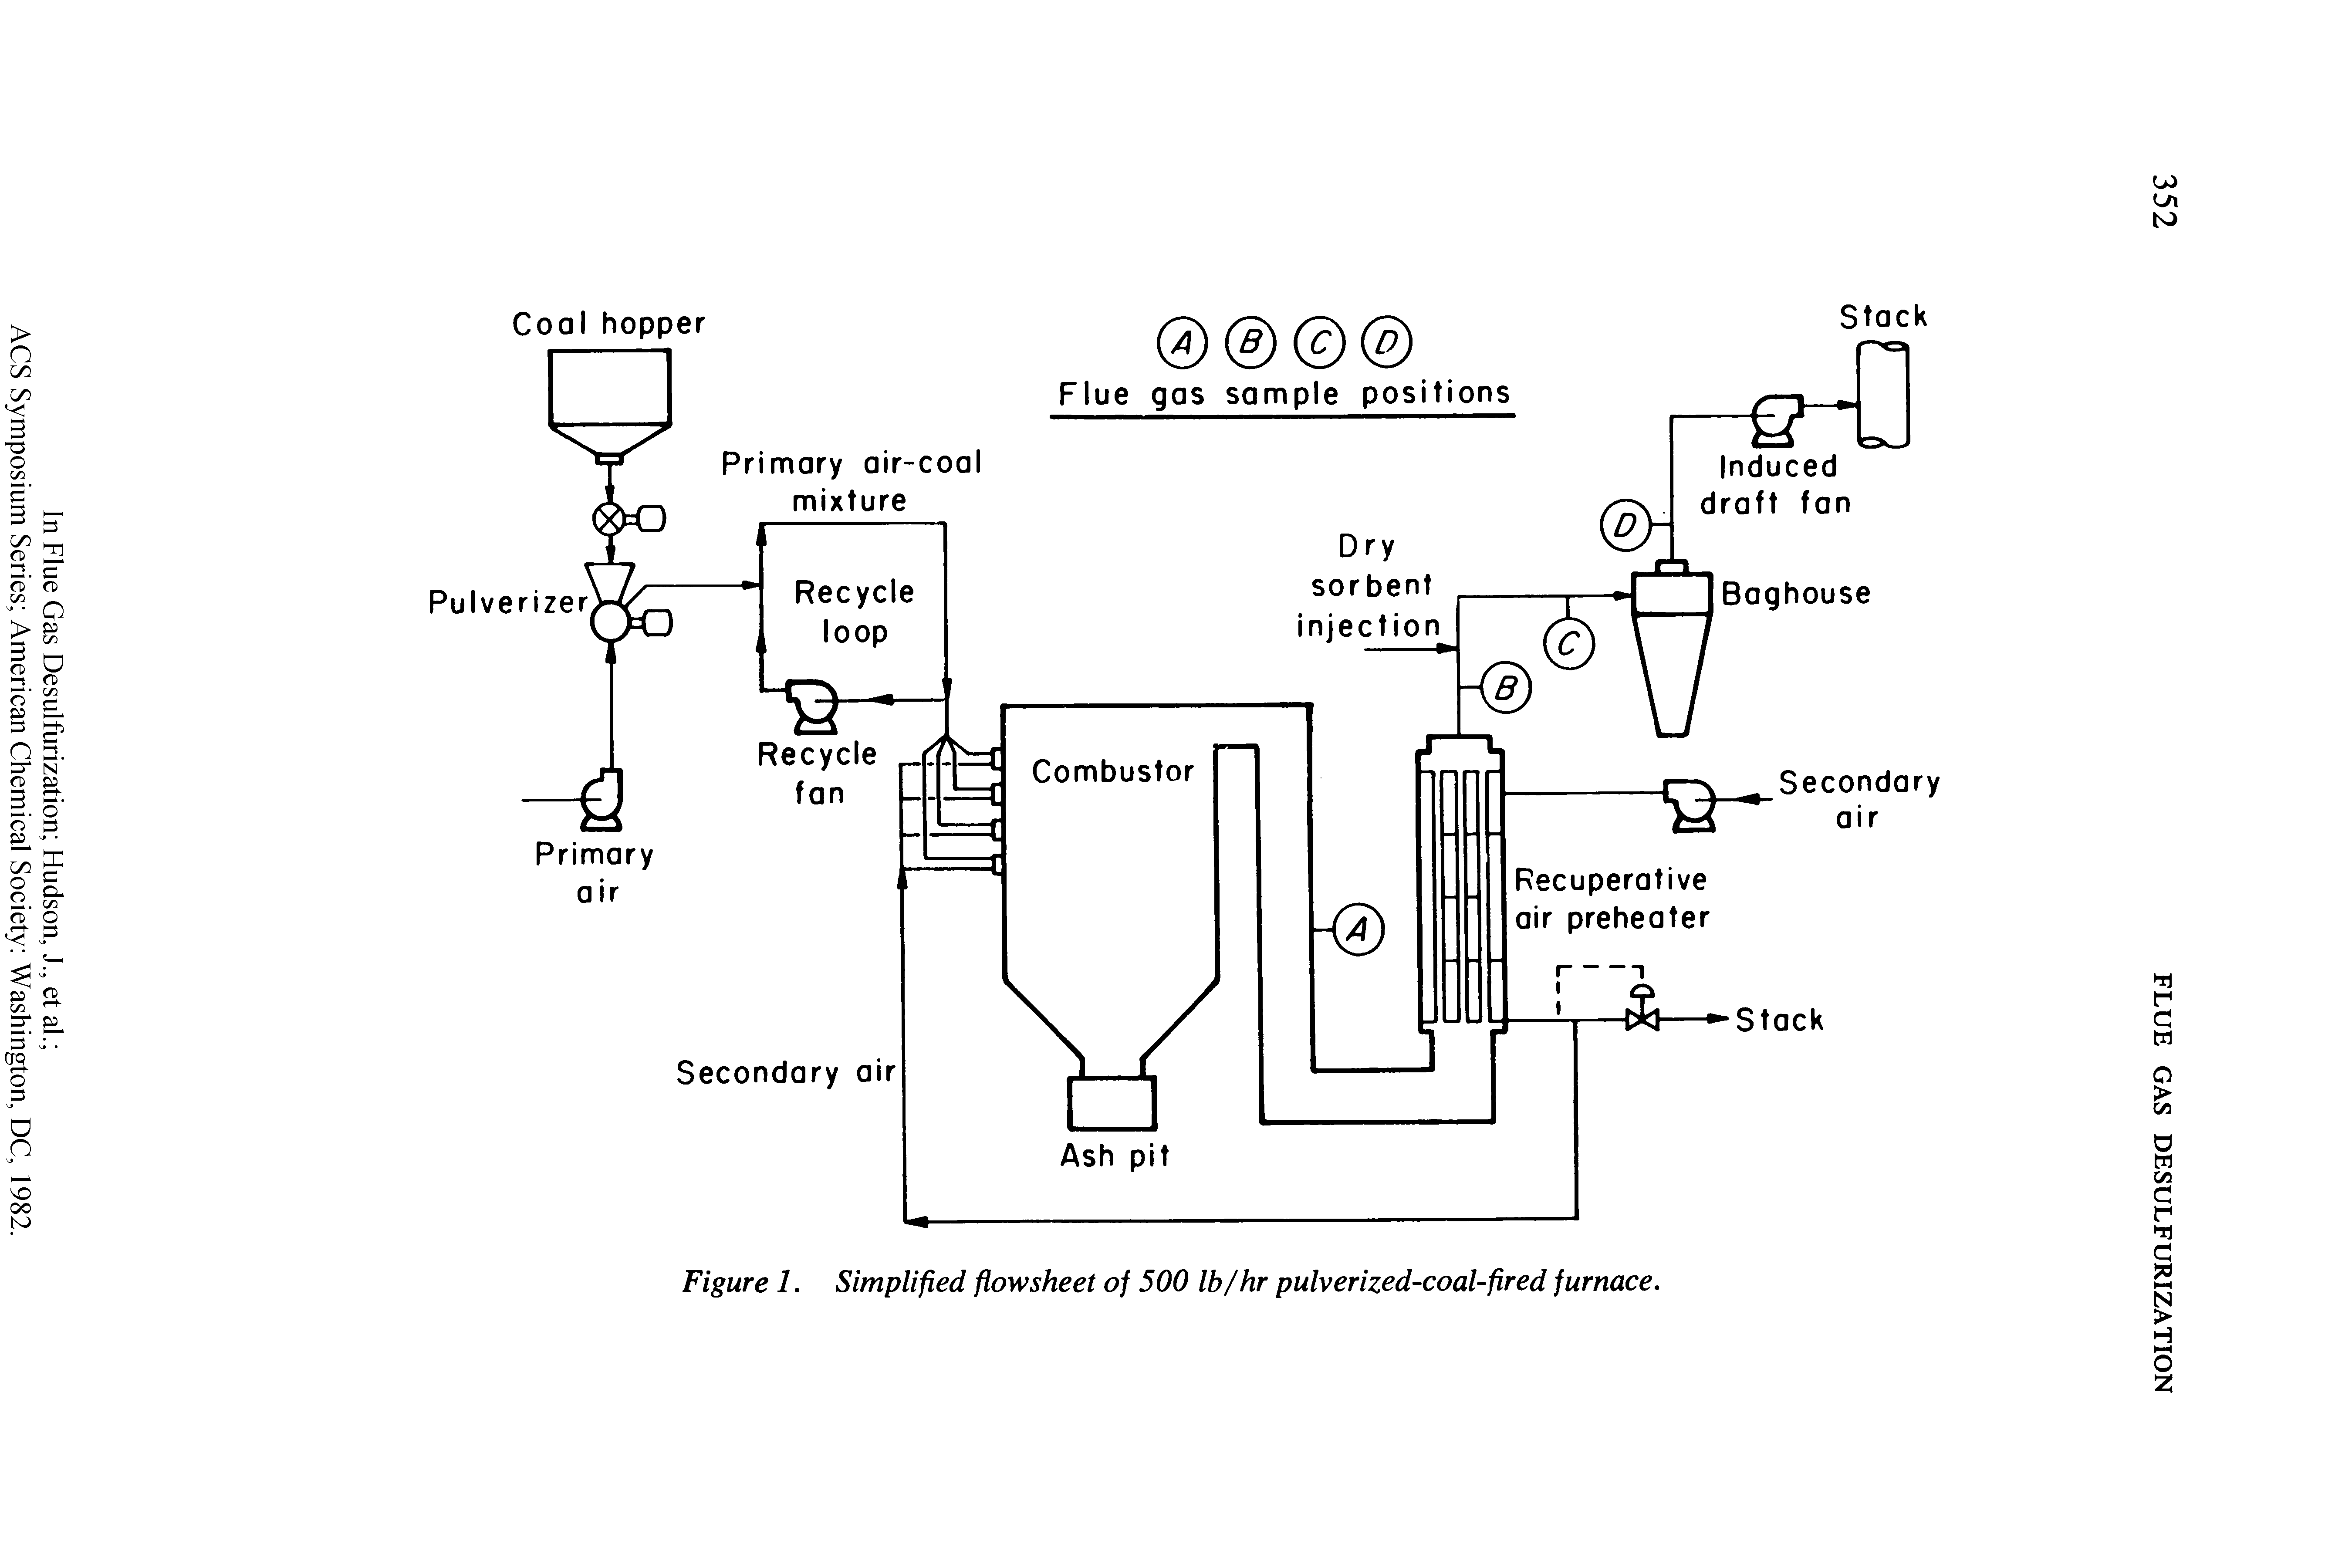 Figure 1. Simplified flowsheet of 500 lb/hr pulverized-coal-fired furnace.